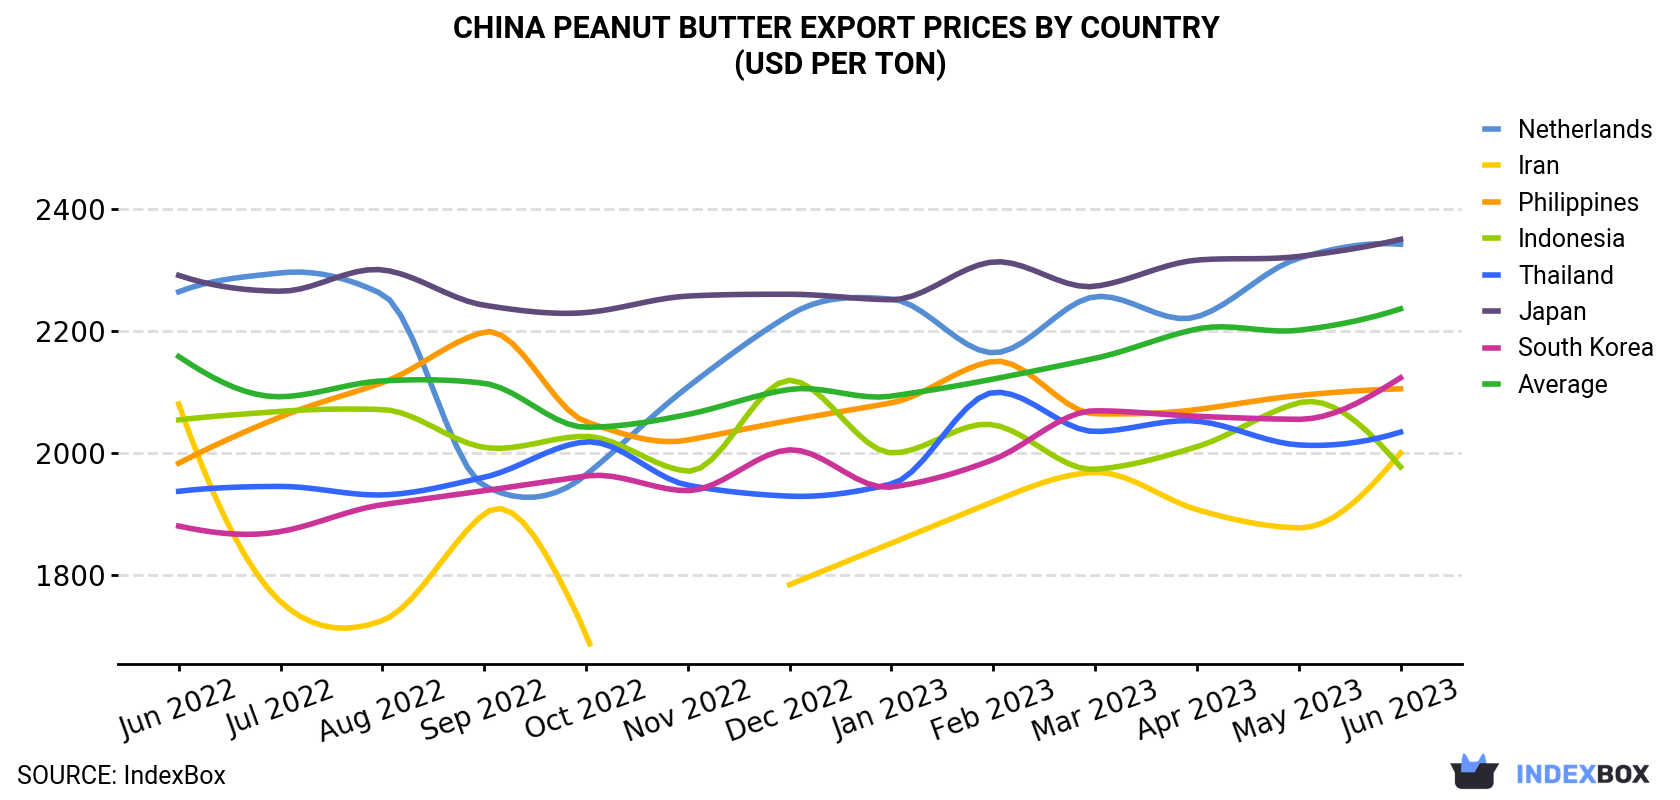 China Peanut Butter Export Prices By Country (USD Per Ton)